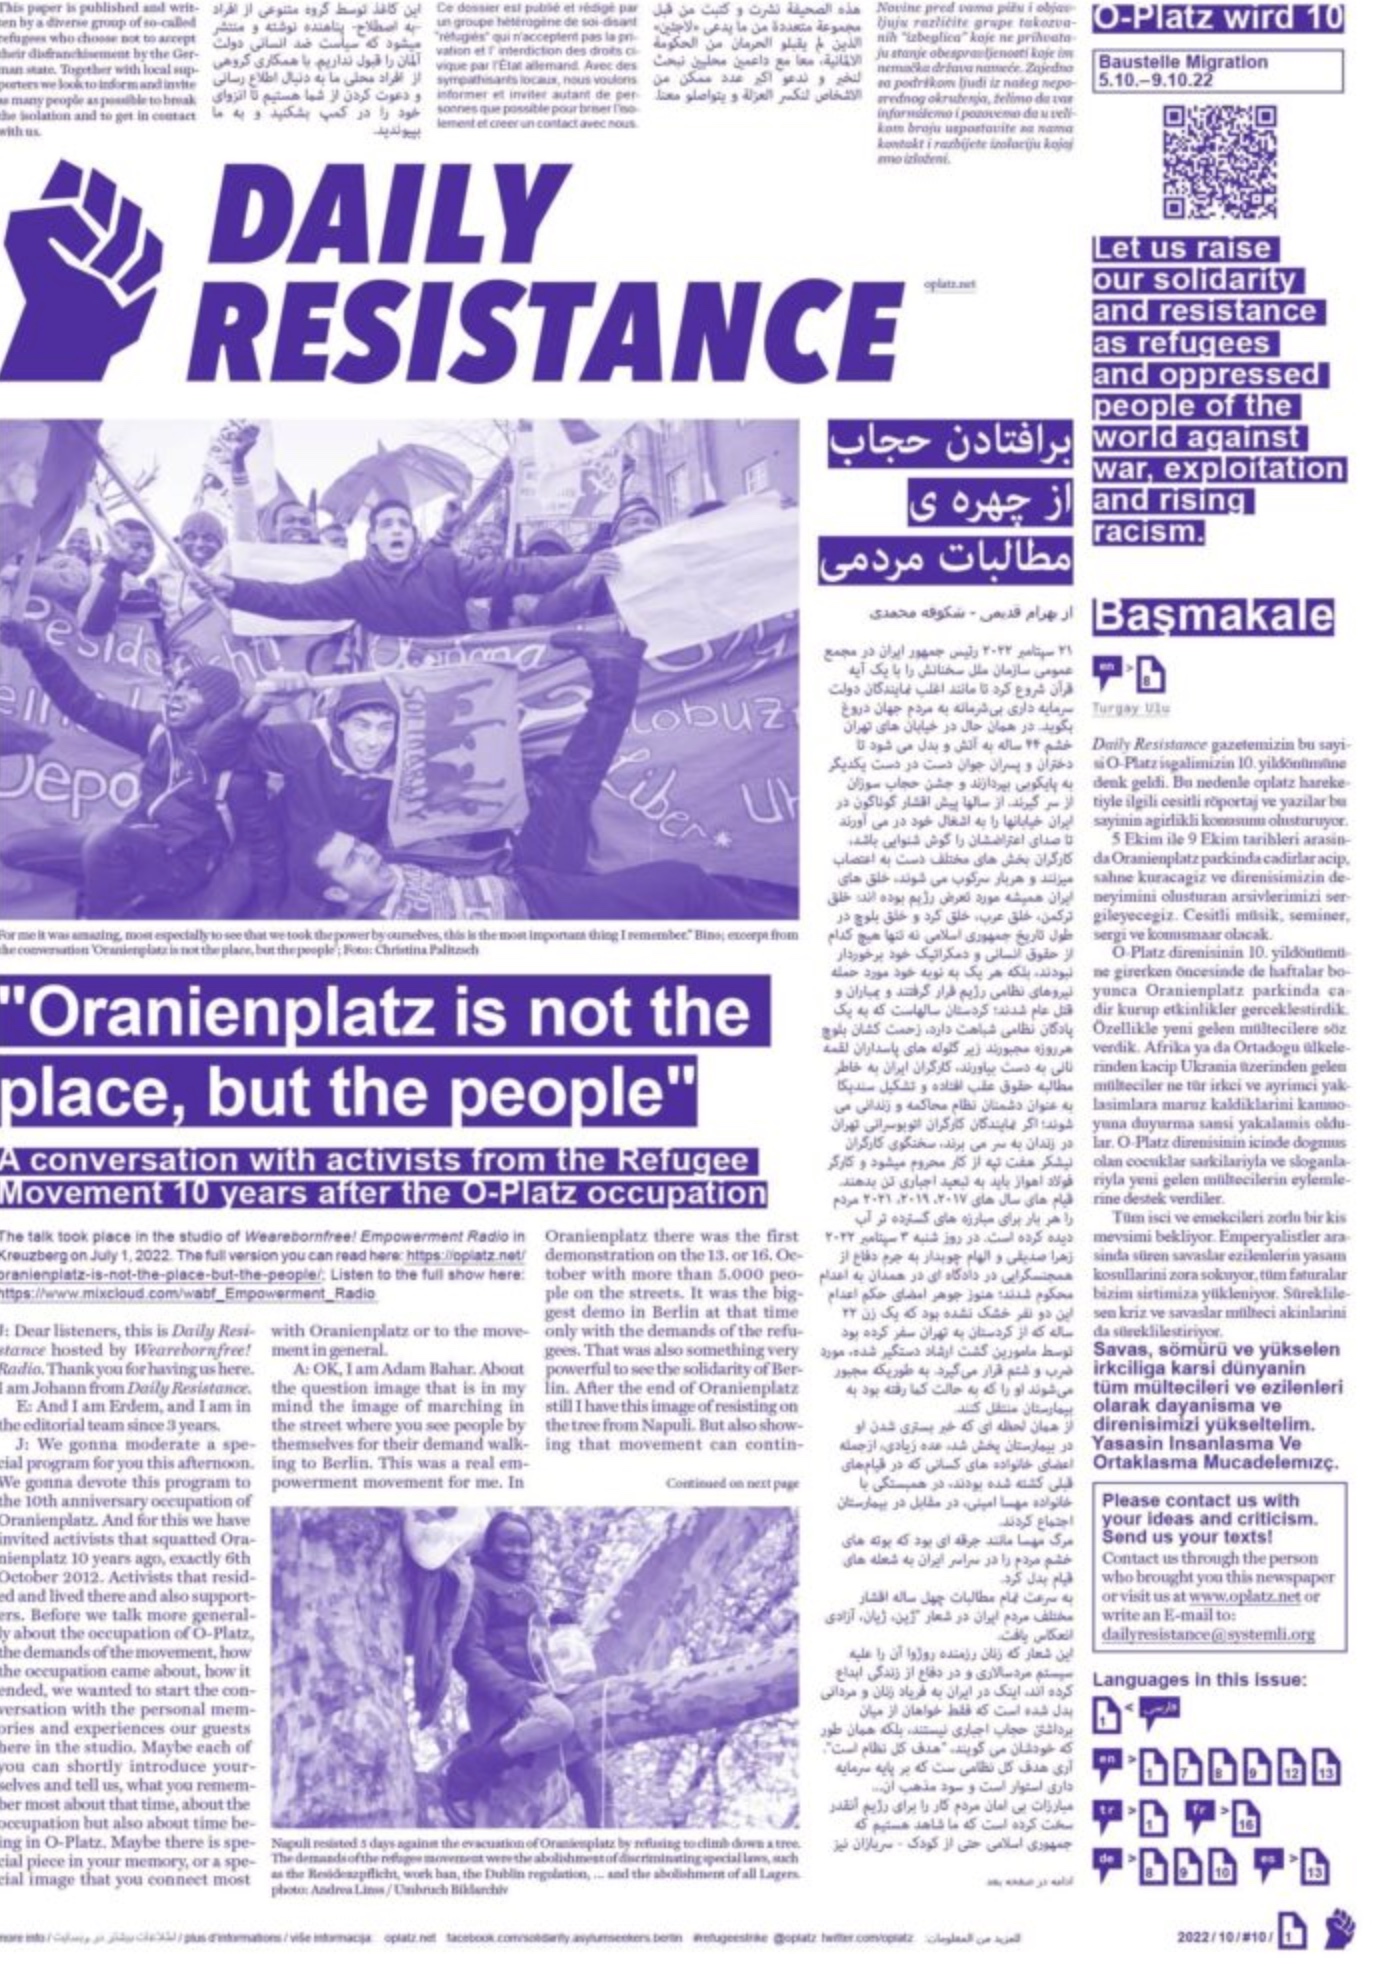 Issue #10 of Daily Resistance is out!